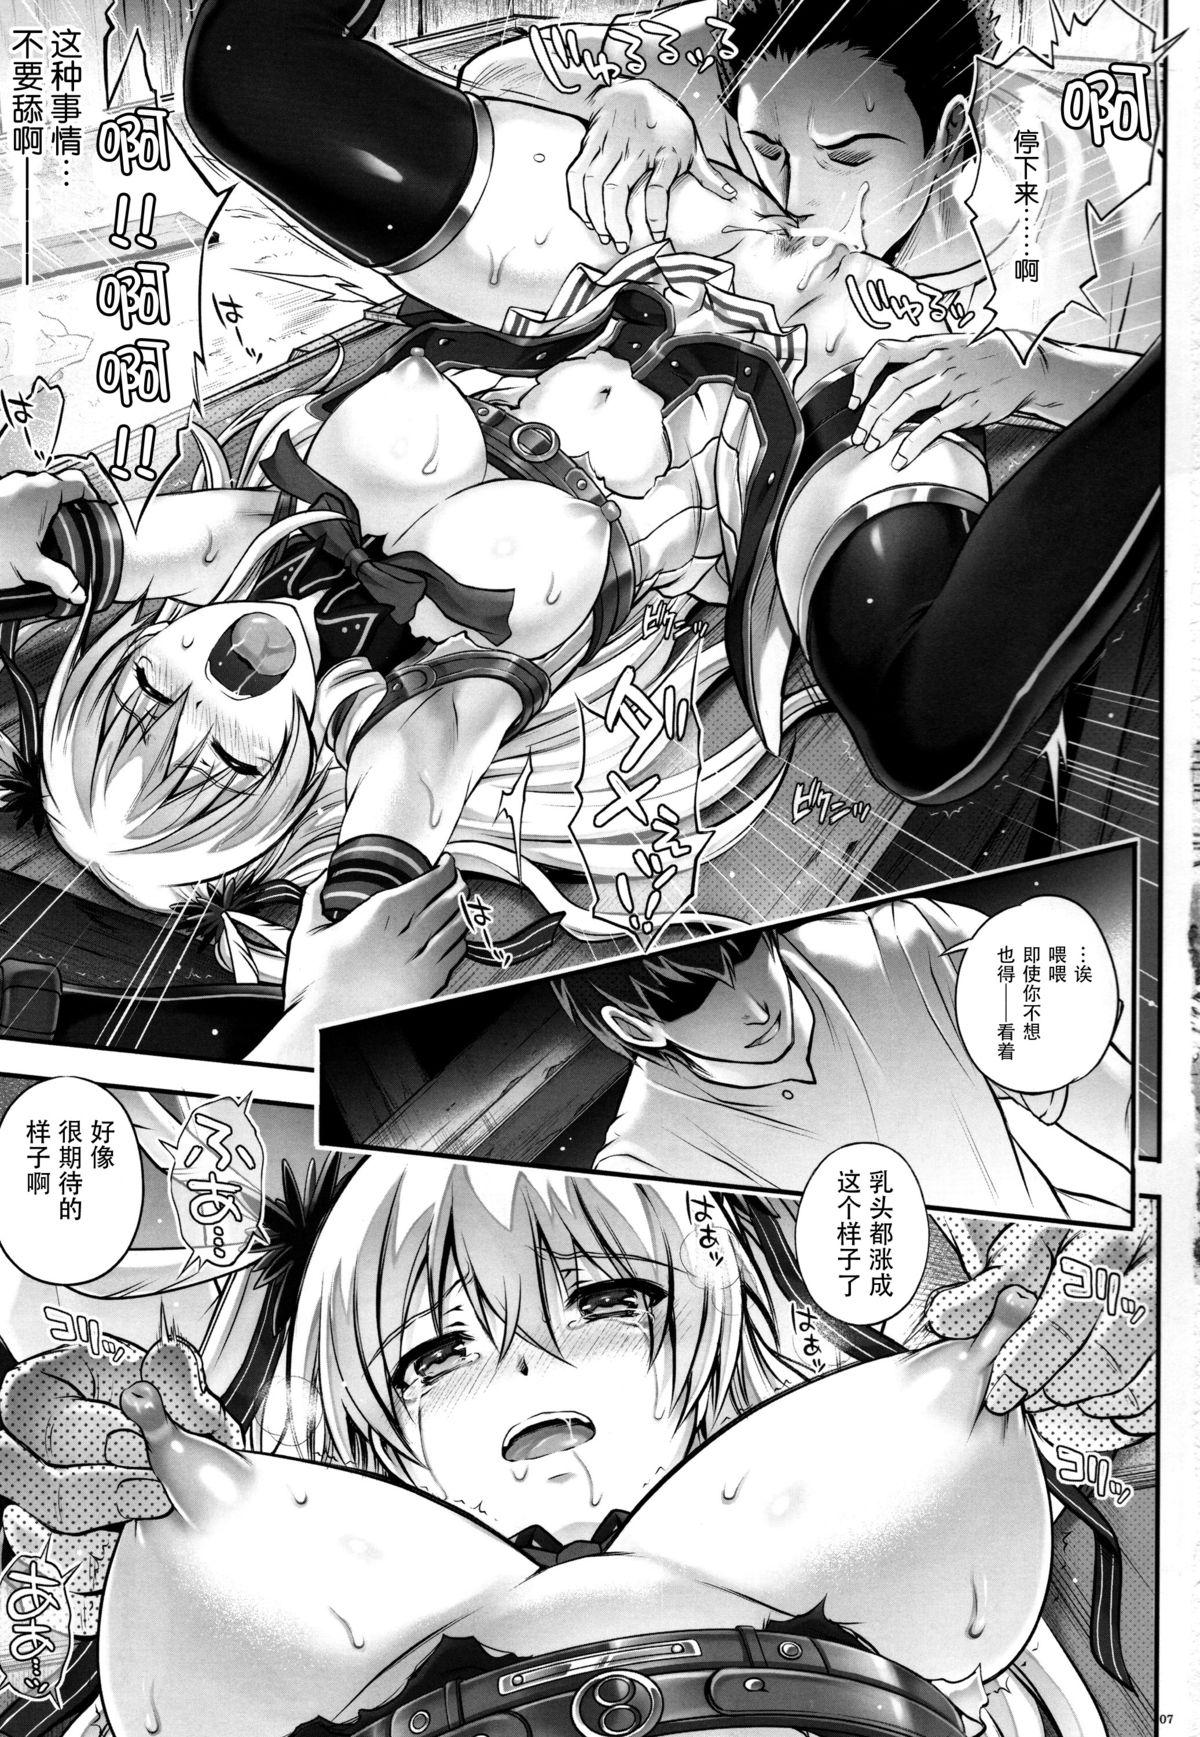 Masturbating T-26 SeeeN!! - The legend of heroes Francais - Page 8